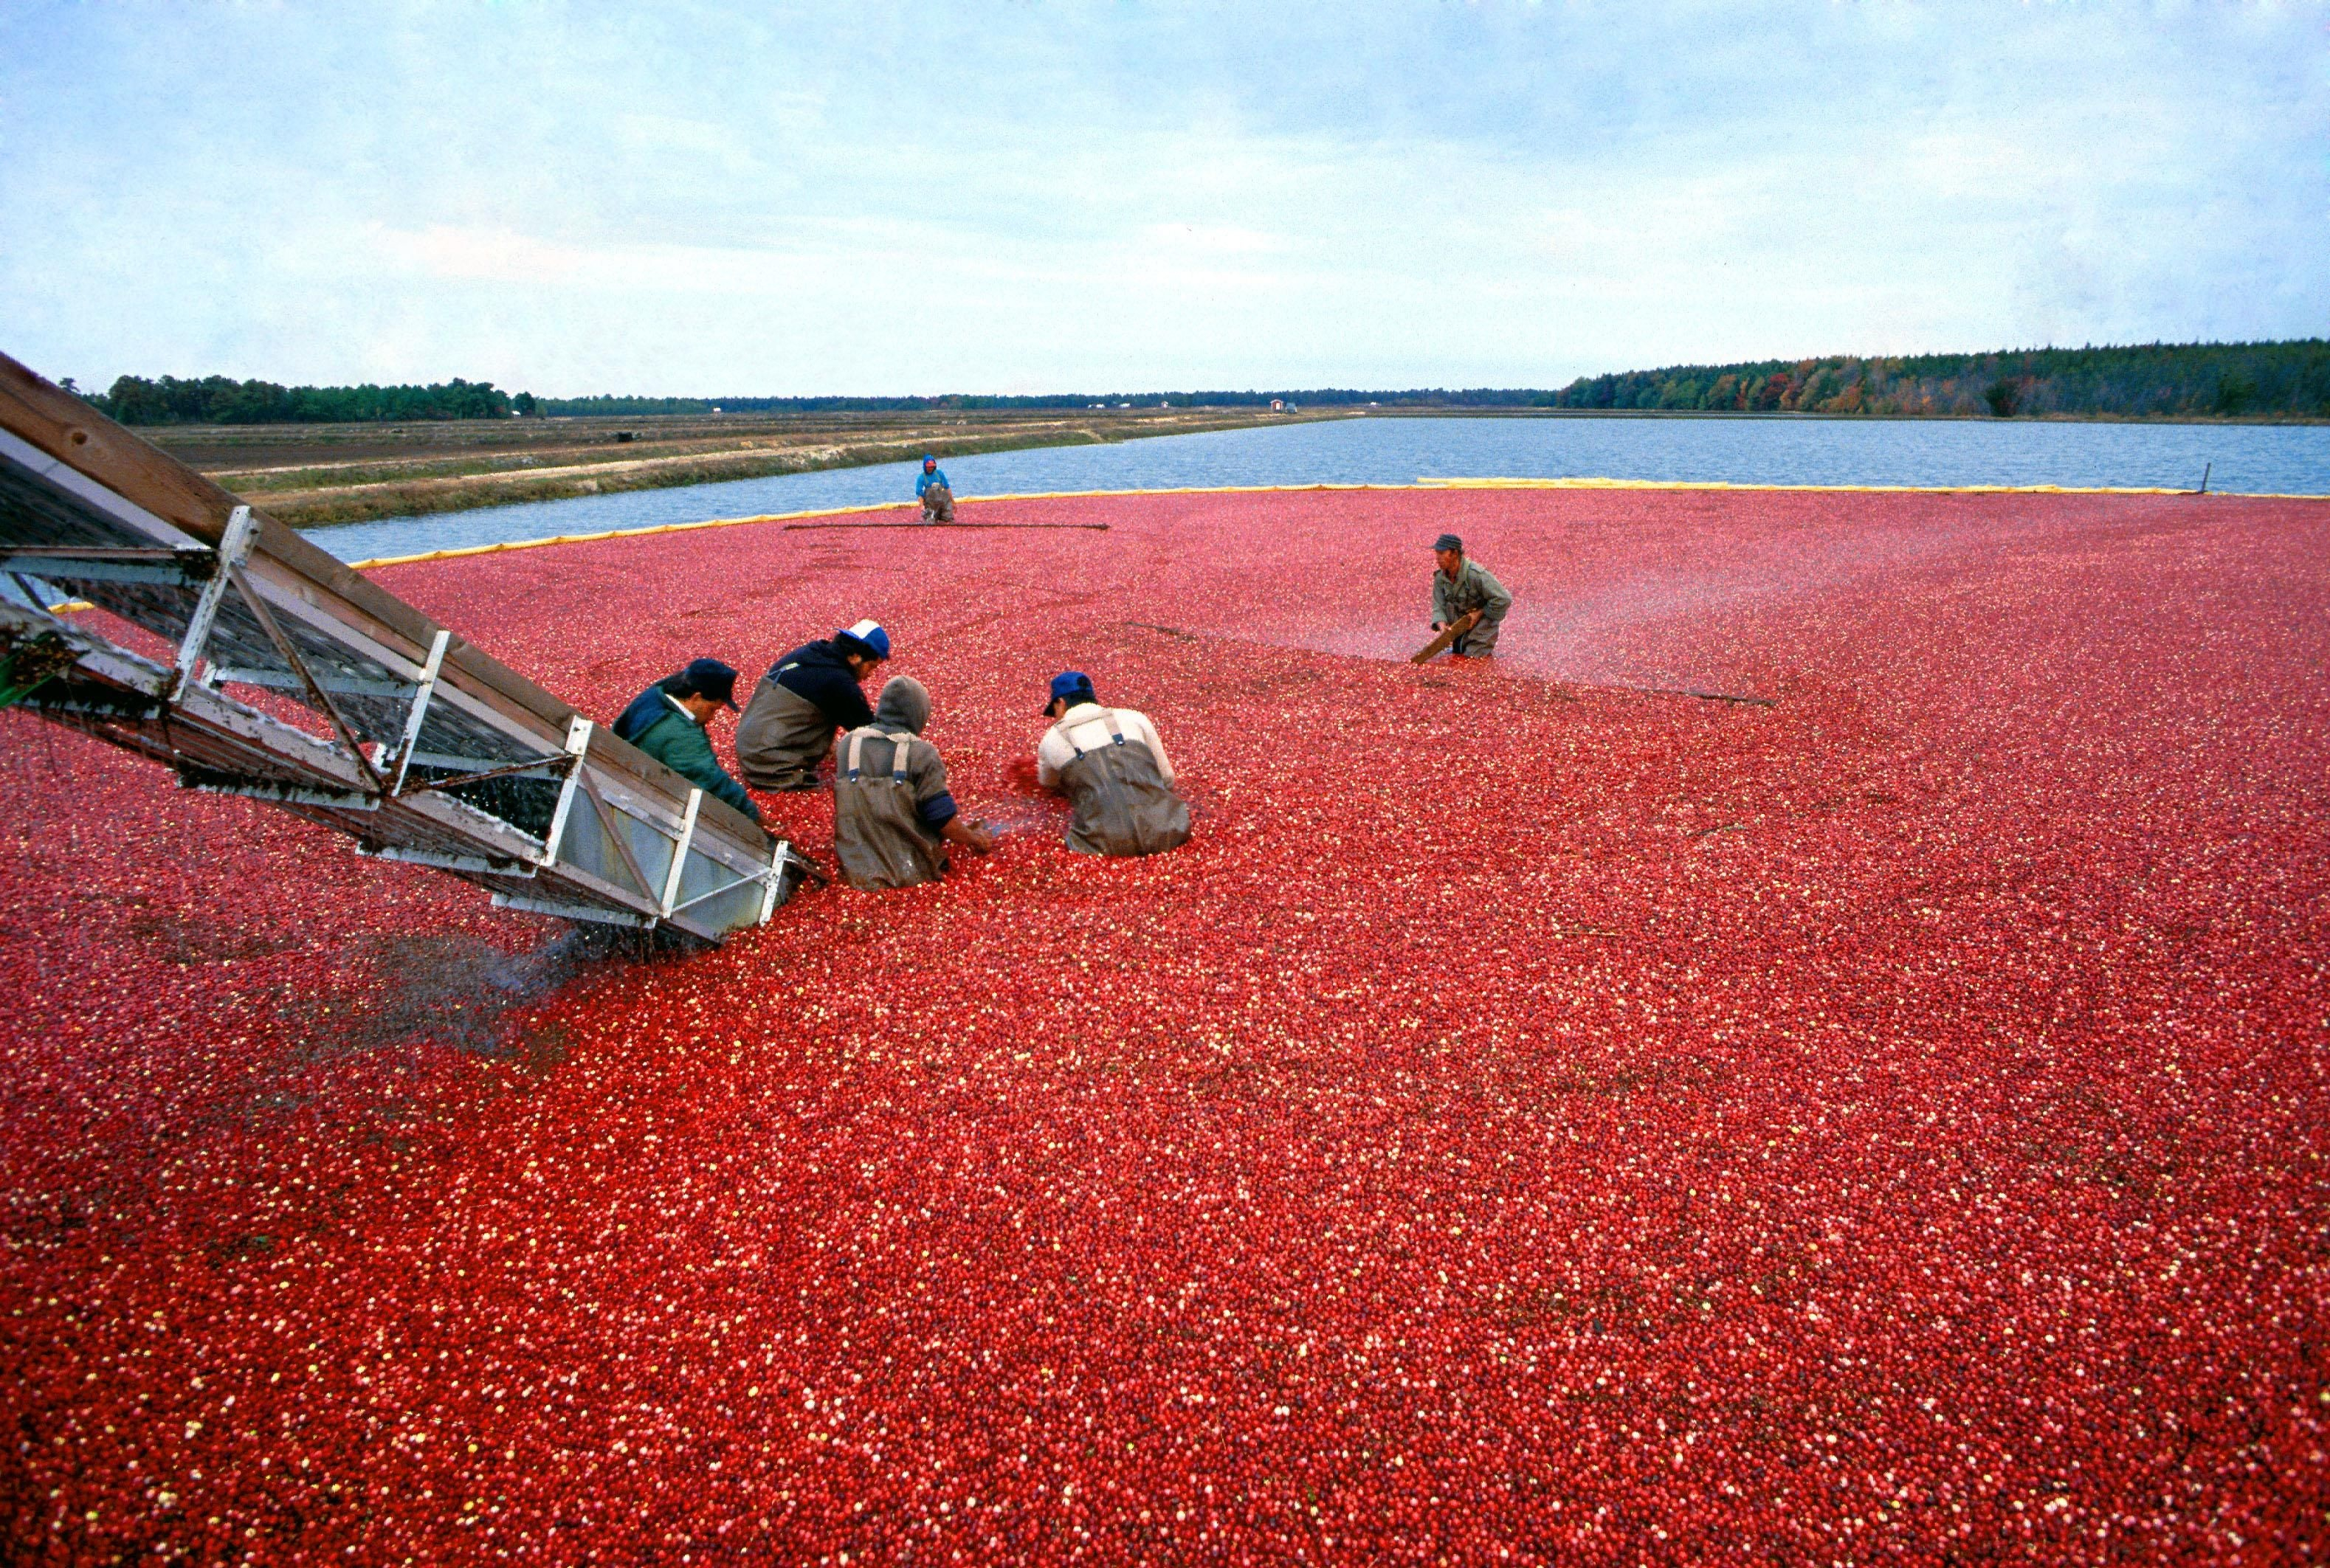 6 workers in a cranberry bog harvesting cranberries